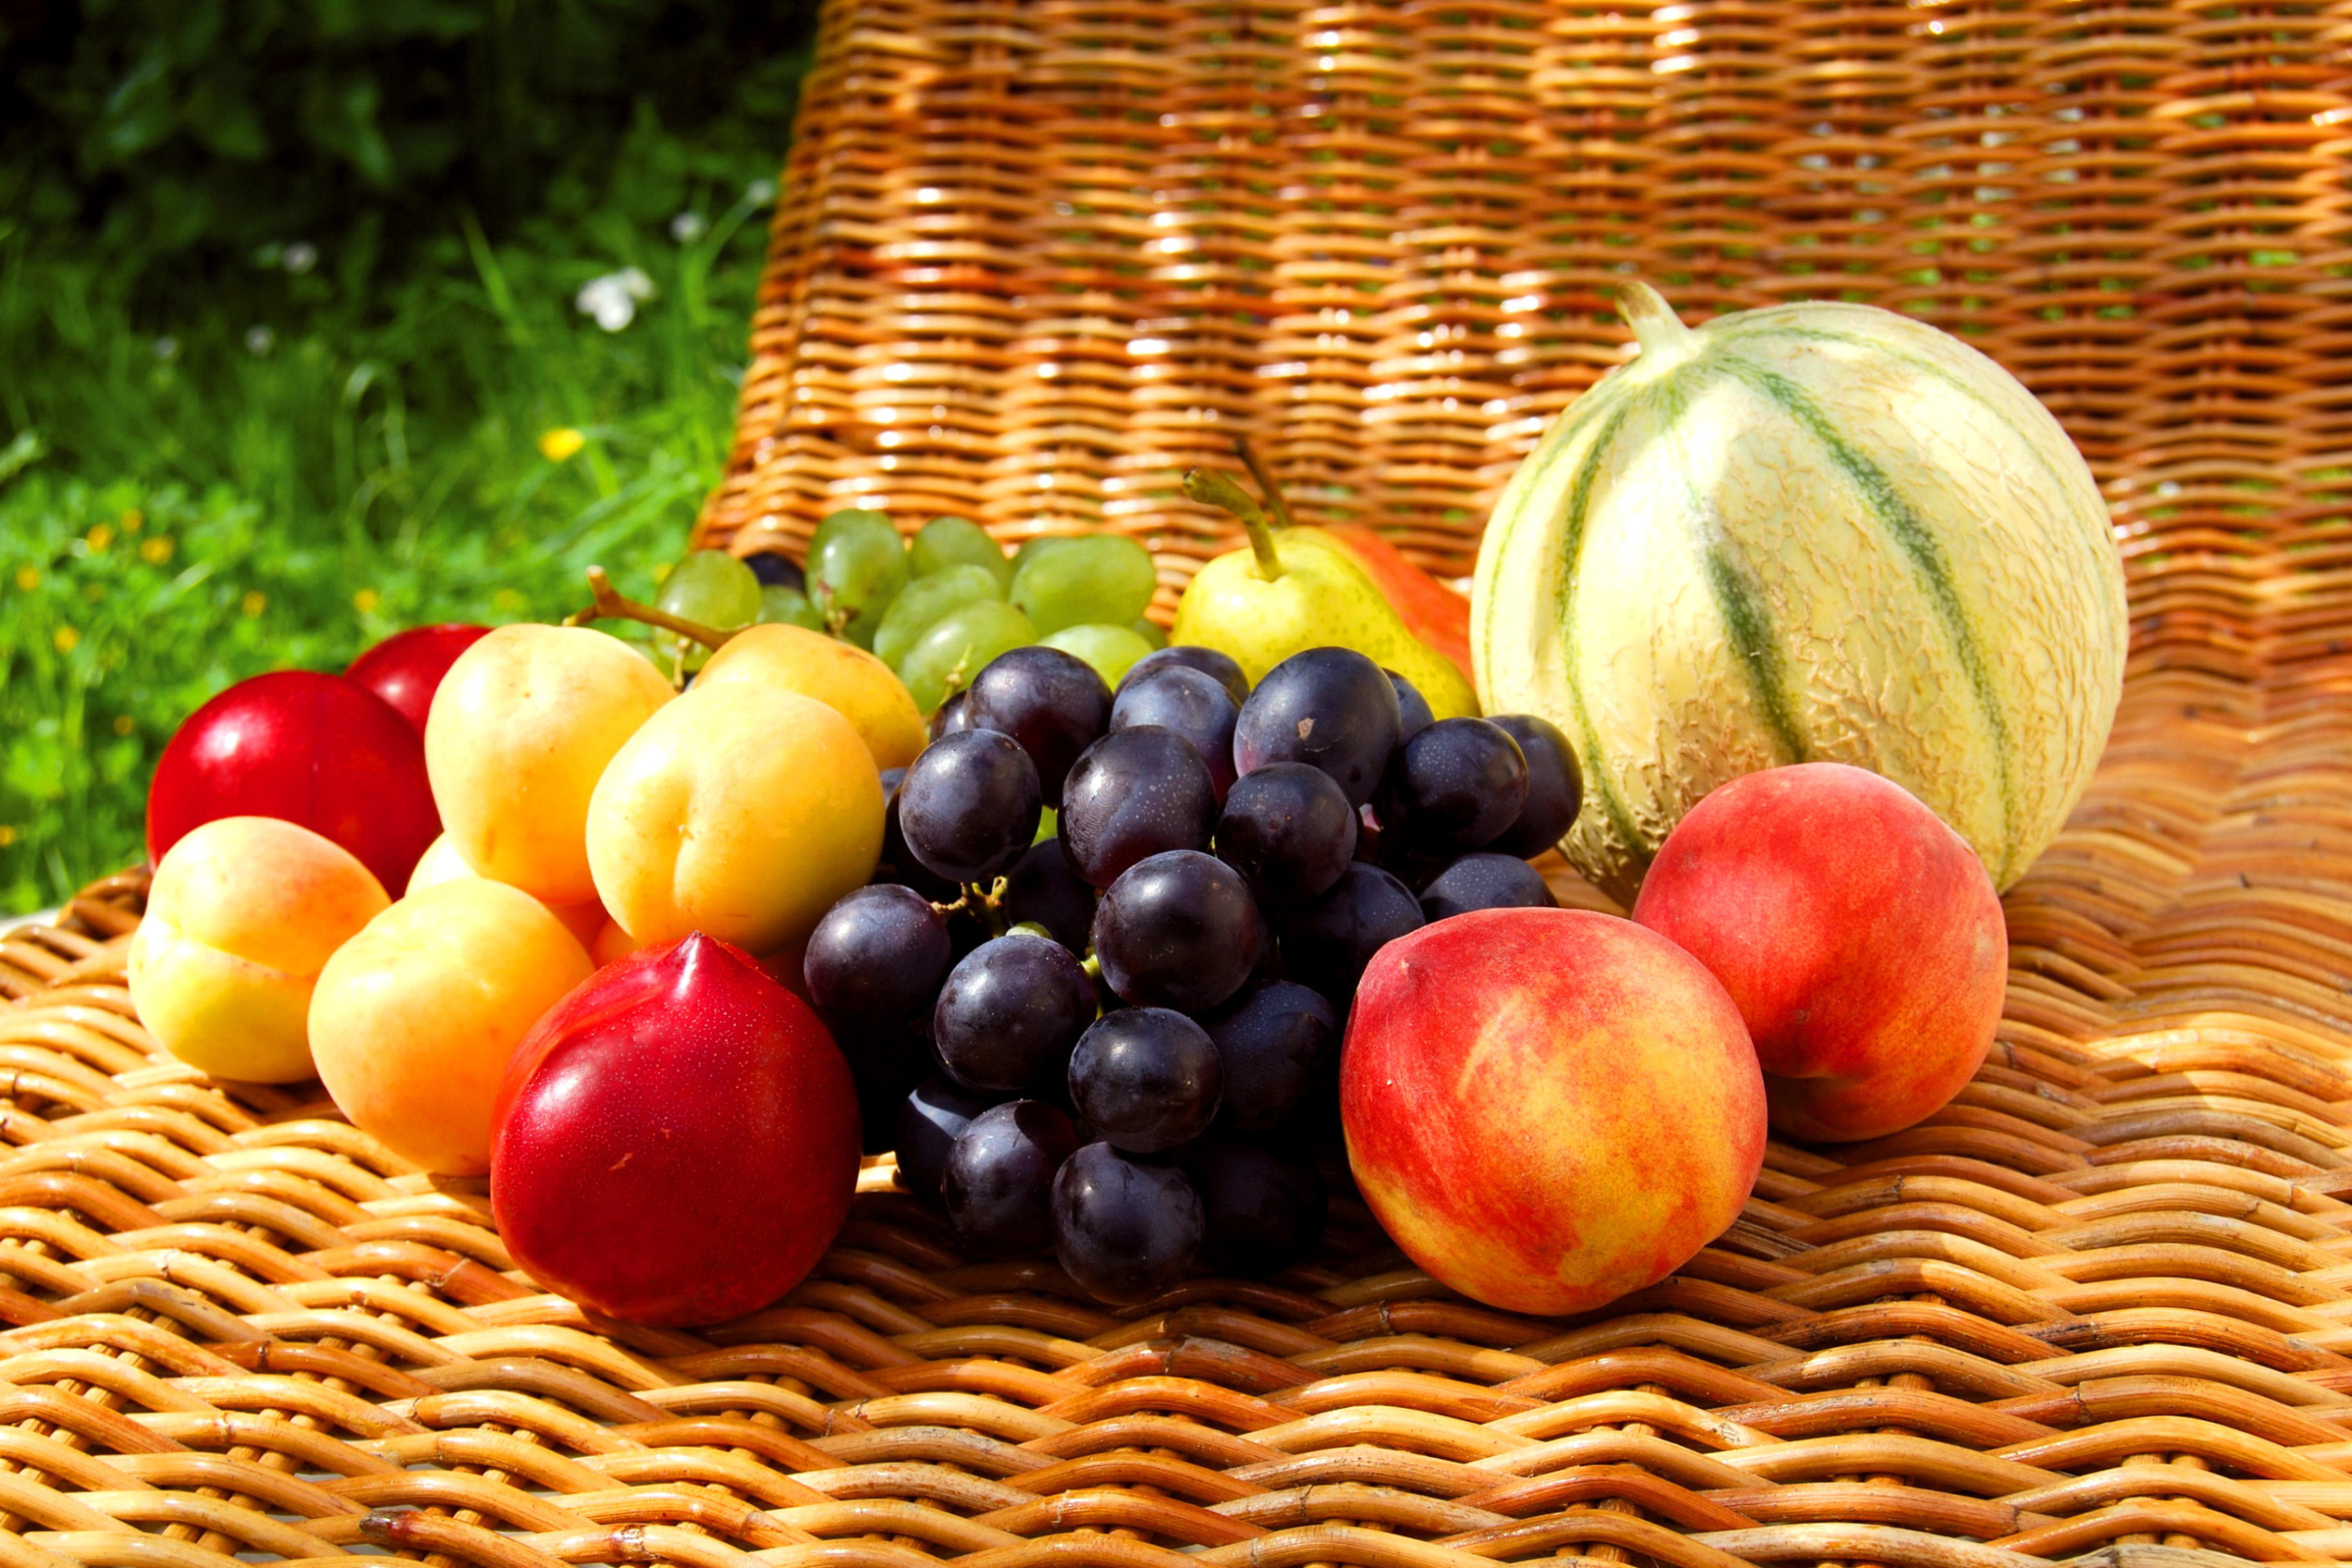 Melons, apricots, peaches, nectarines, grapes, pear screenshot #1 2880x1920